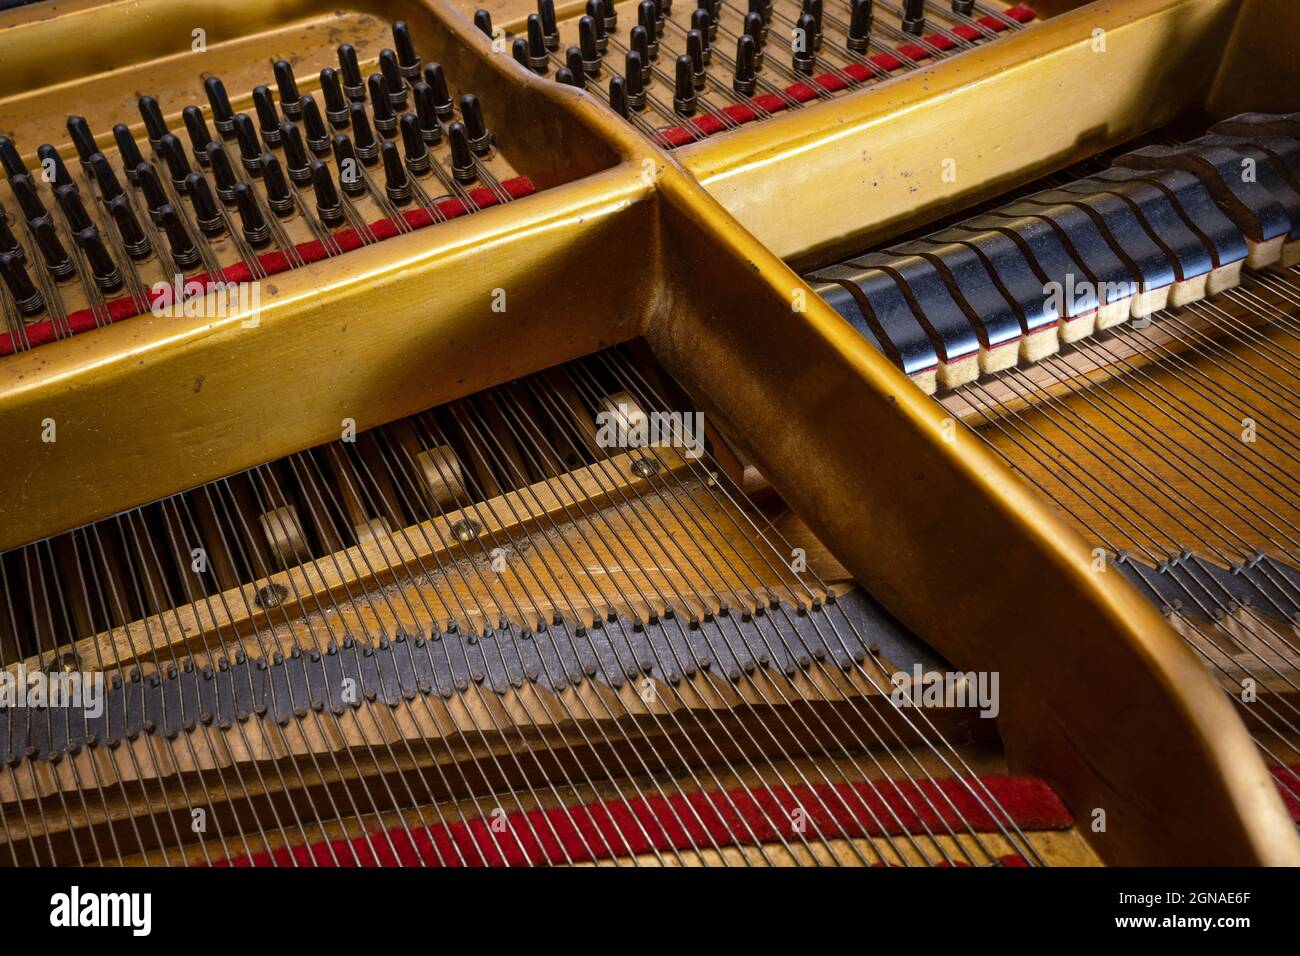 View to the mechanics inside an older grand piano, hammer from below and damper from above on the strings of the acoustic musical instrument, selected Stock Photo